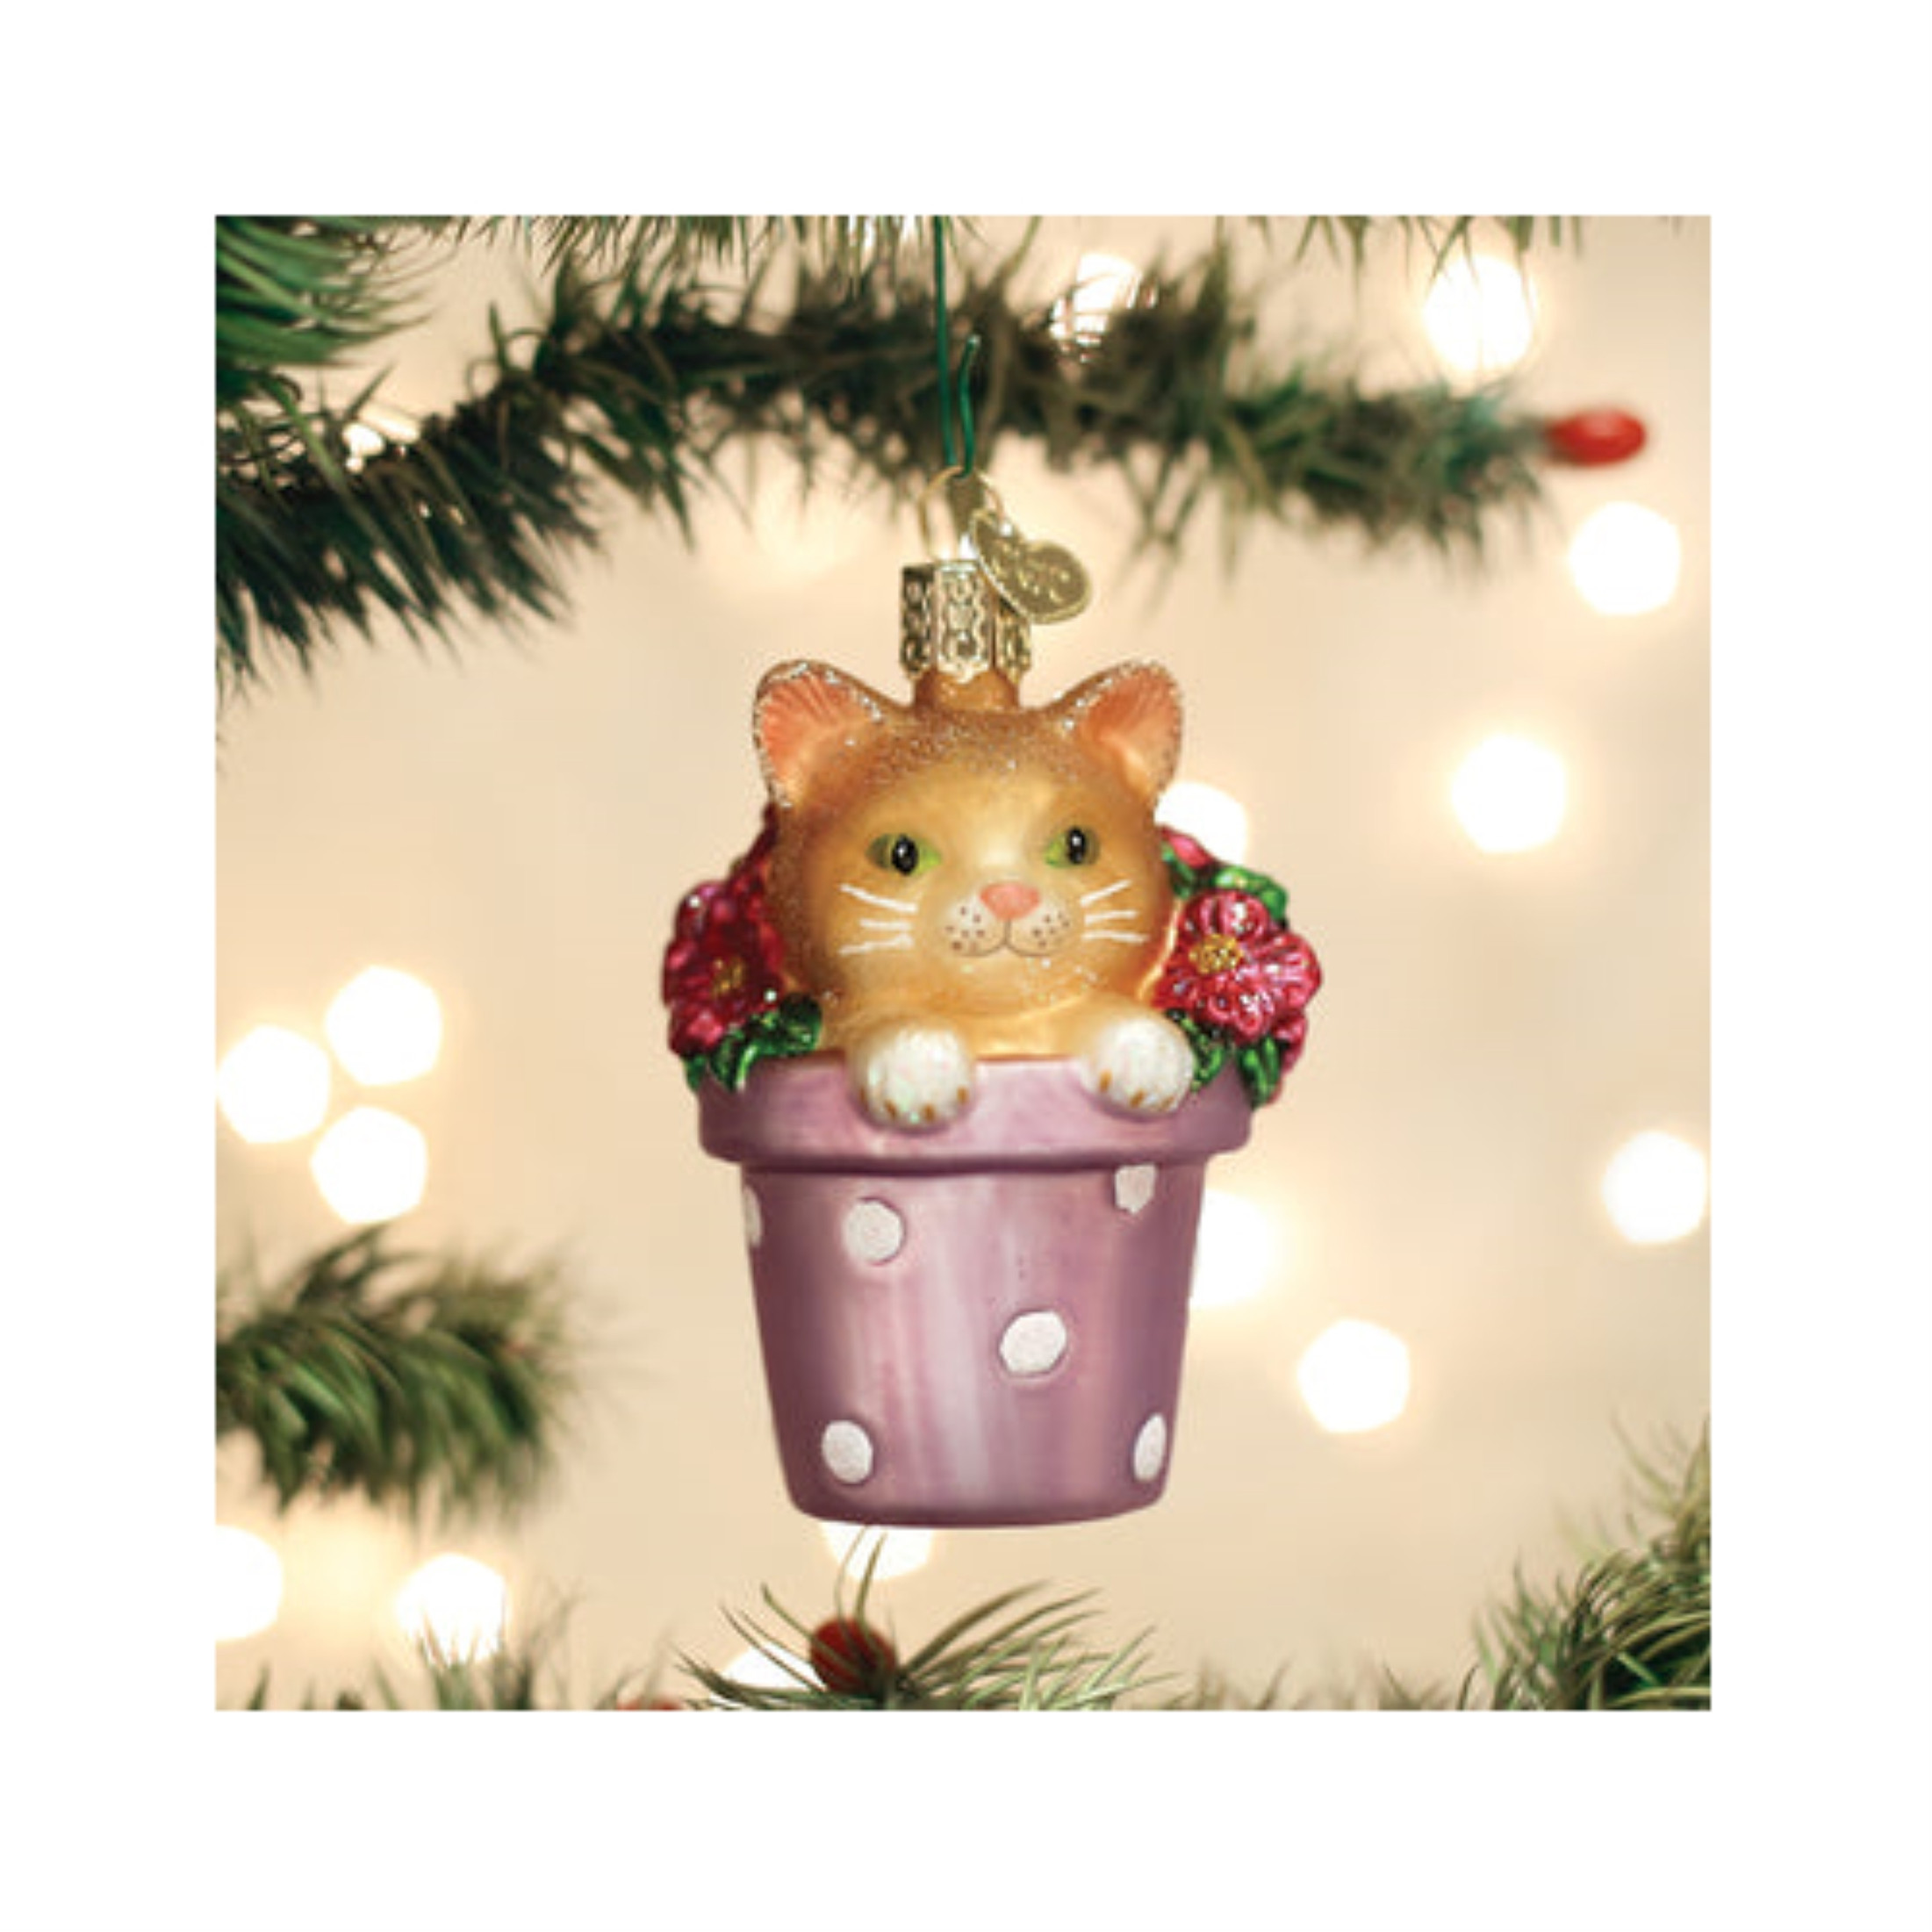 Old World Christmas Glass Blown Holiday Tree Ornament, Kitten in Flower Pot (With OWC Gift Box)